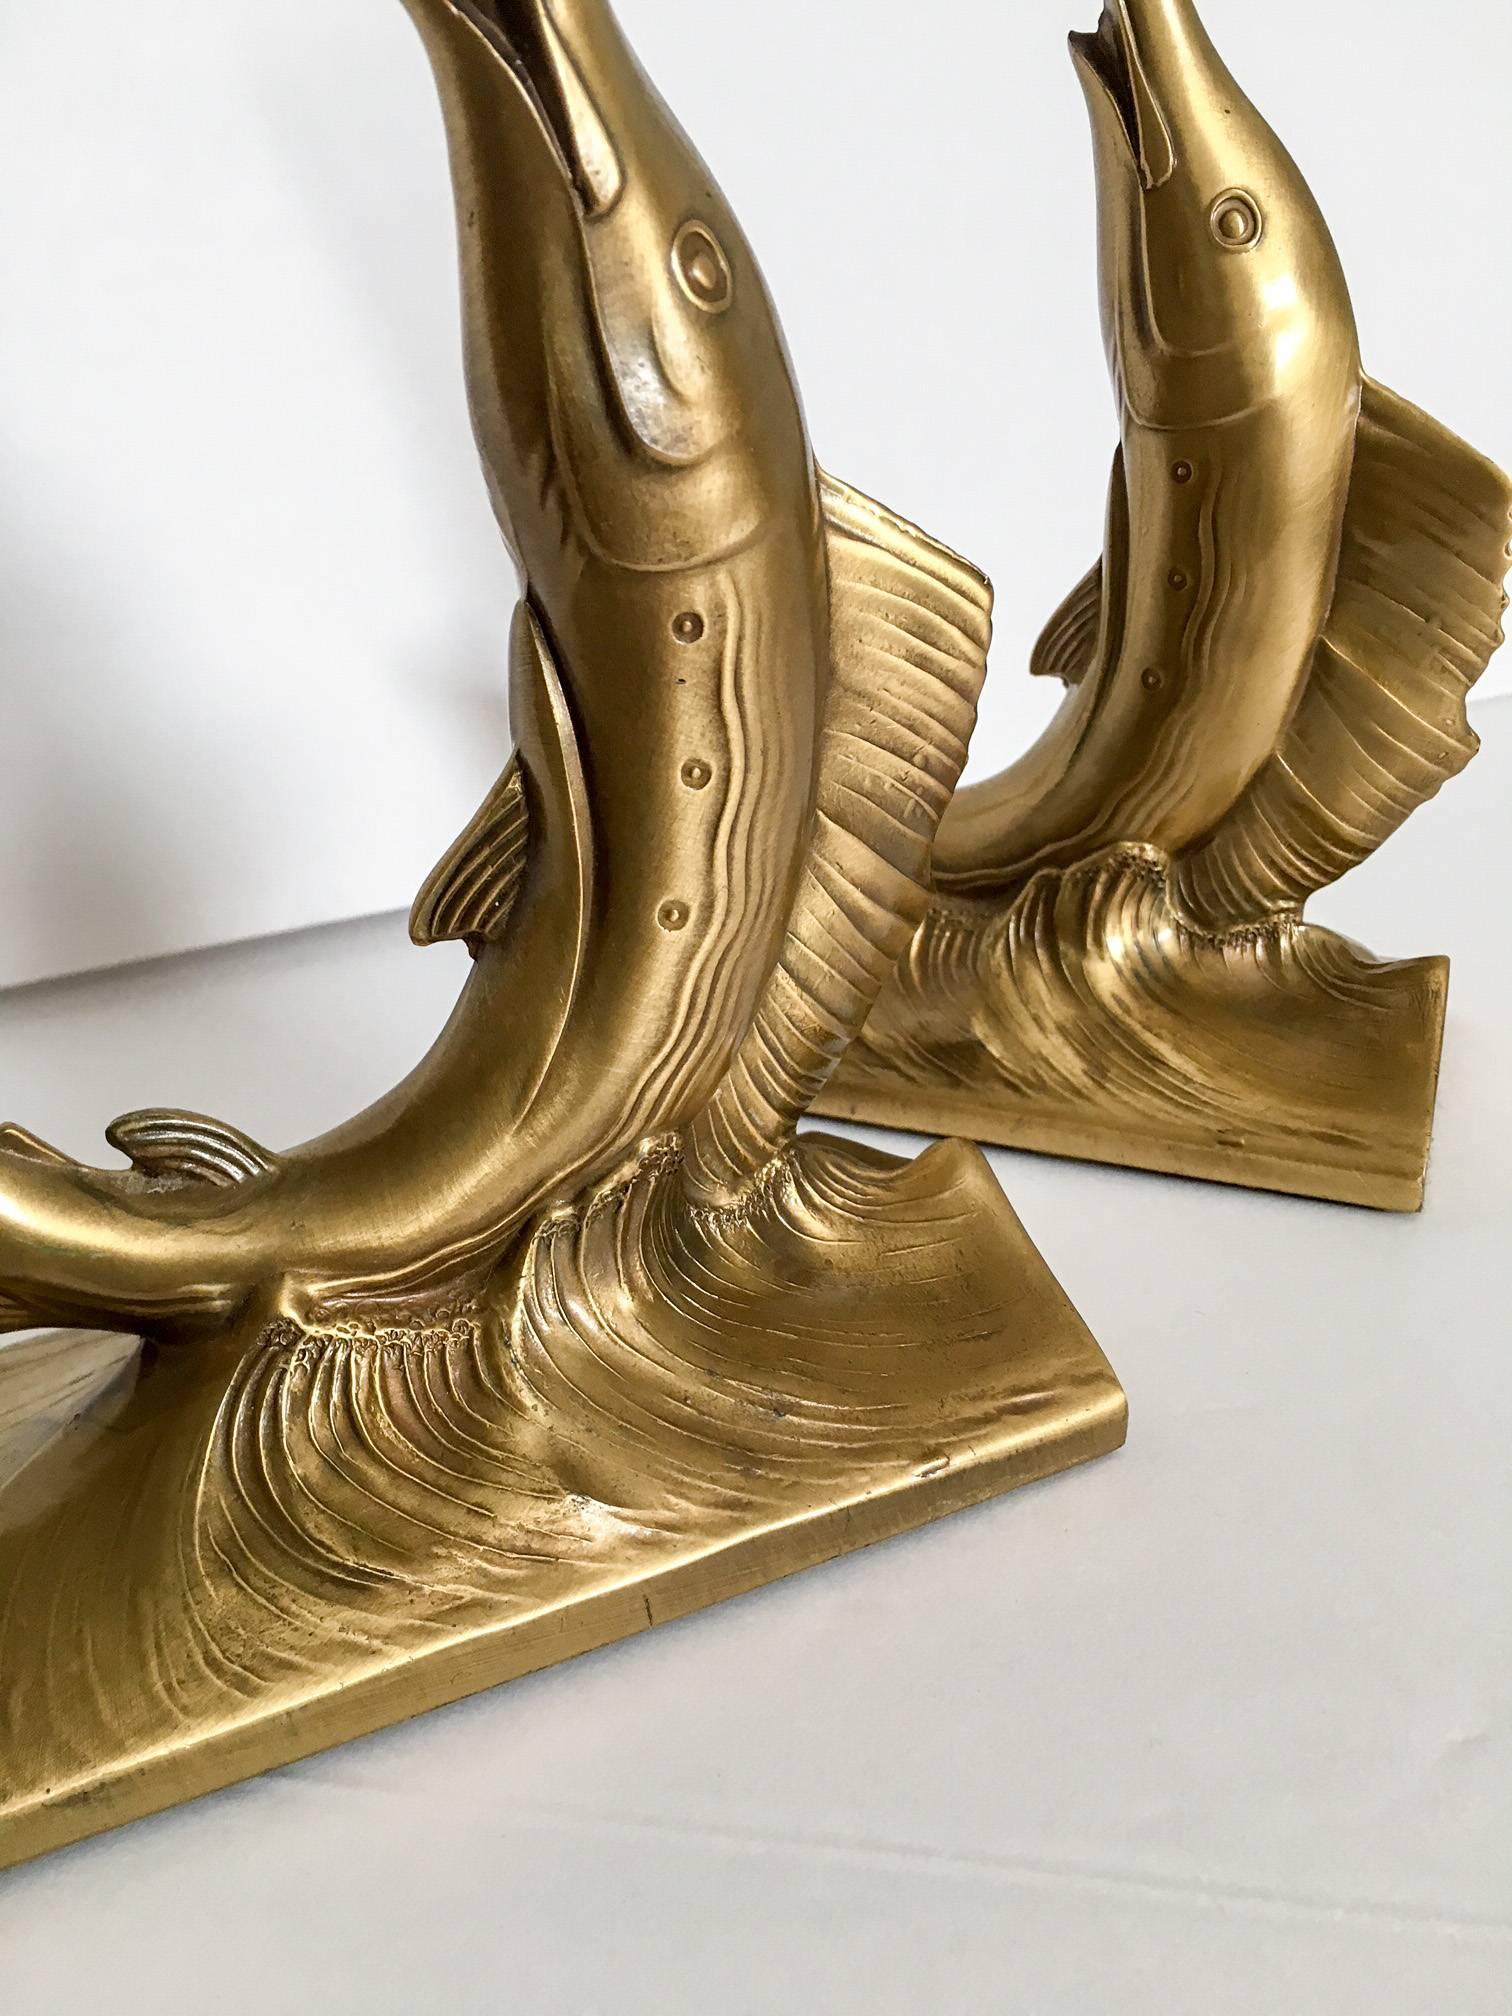 Hollywood Regency Gold Blue Marlin Nautical Bookends, a Pair